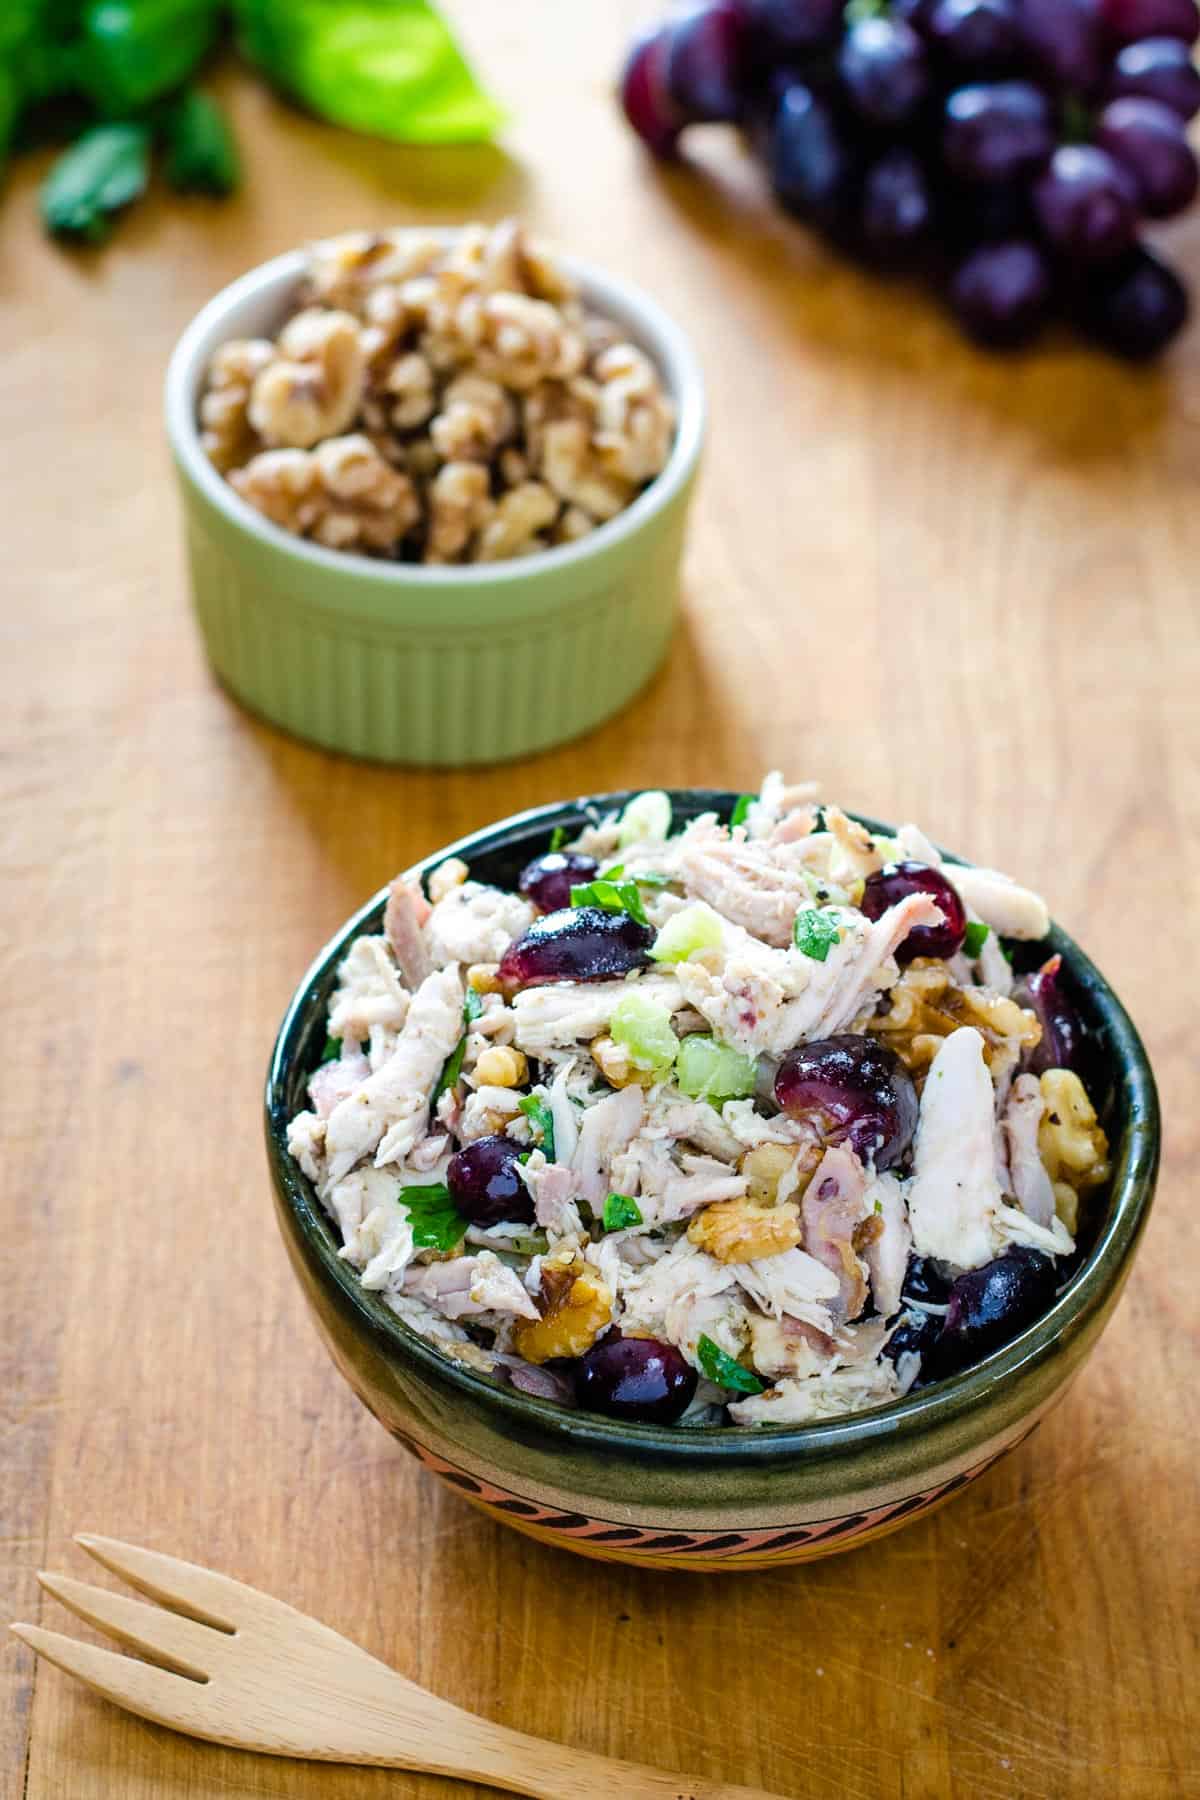 Chicken salad with grapes and walnuts